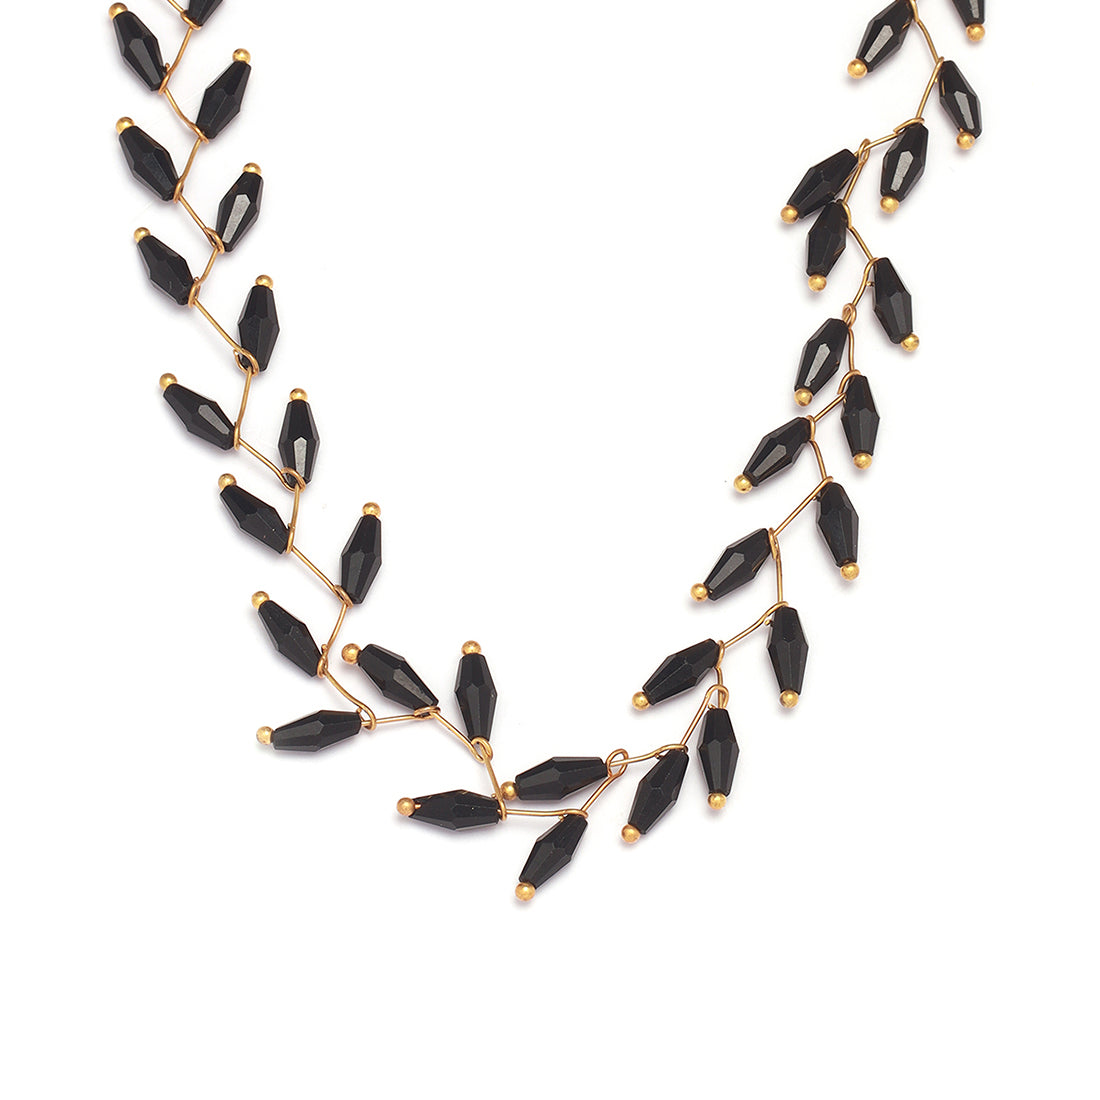 Gold-Tone Necklace With Black Oval-Shaped Translucent Beads In A Leaf Pattern